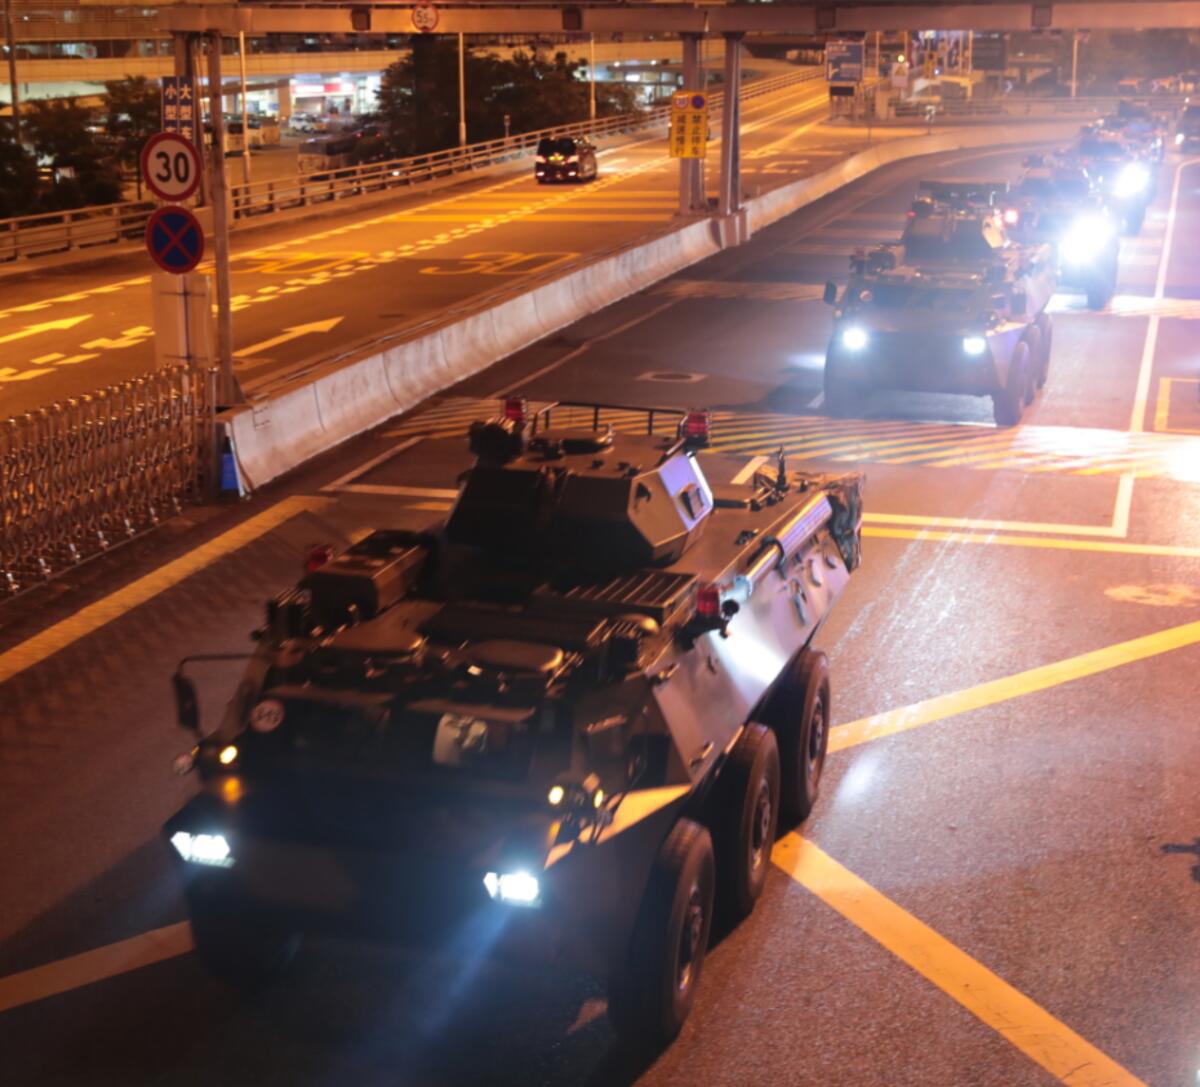 In this photo released by China's Xinhua News Agency, armored personnel carriers of China's People's Liberation Army (PLA) pass through the Huanggang Port border between China and Hong Kong, Thursday, Aug. 29, 2019. Chinese state media has published photos of the country's Hong Kong-based troops' armored carriers and a patrol boat undertaking what they call a routine rotation. (Yuan Junmin/Xinhua via AP)